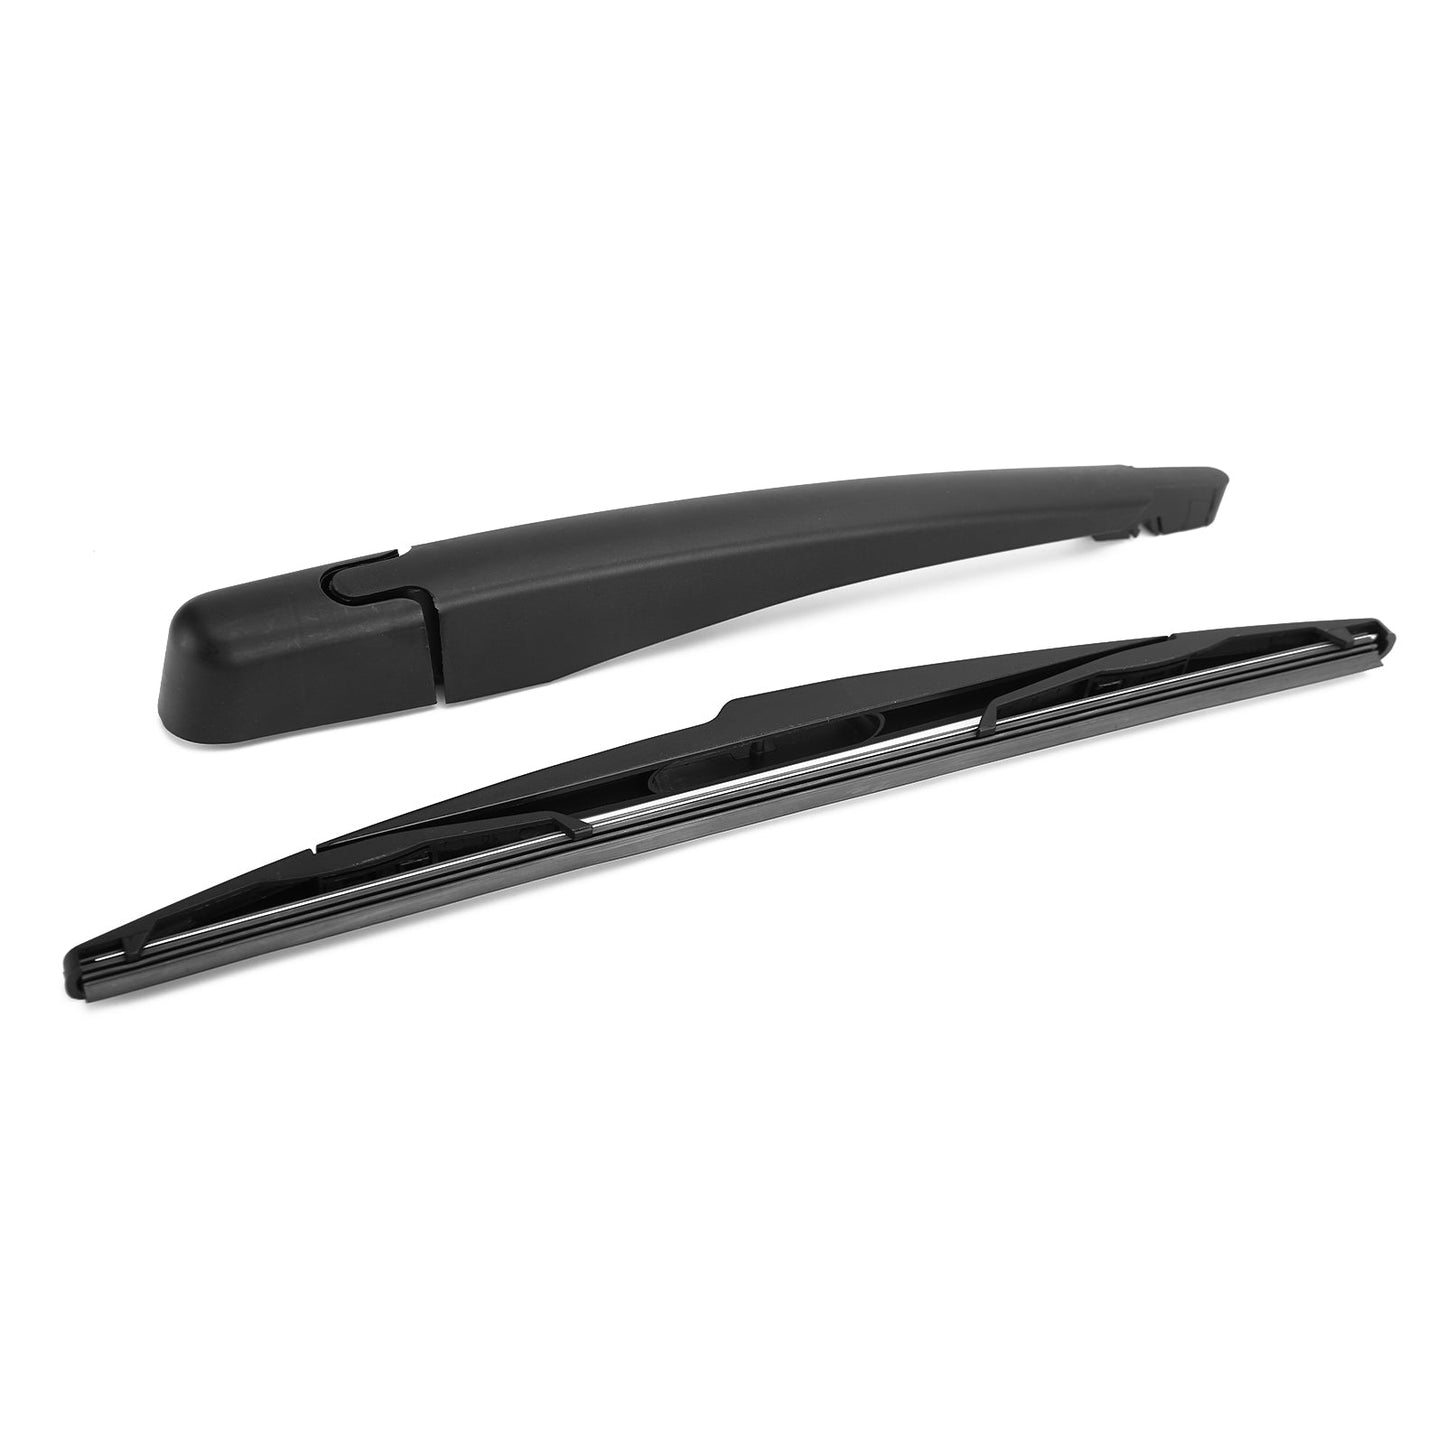 Rear Wiper Arm Blade Kit Fit For Dodge Caravan Chrysler Town & Country 2008-2015